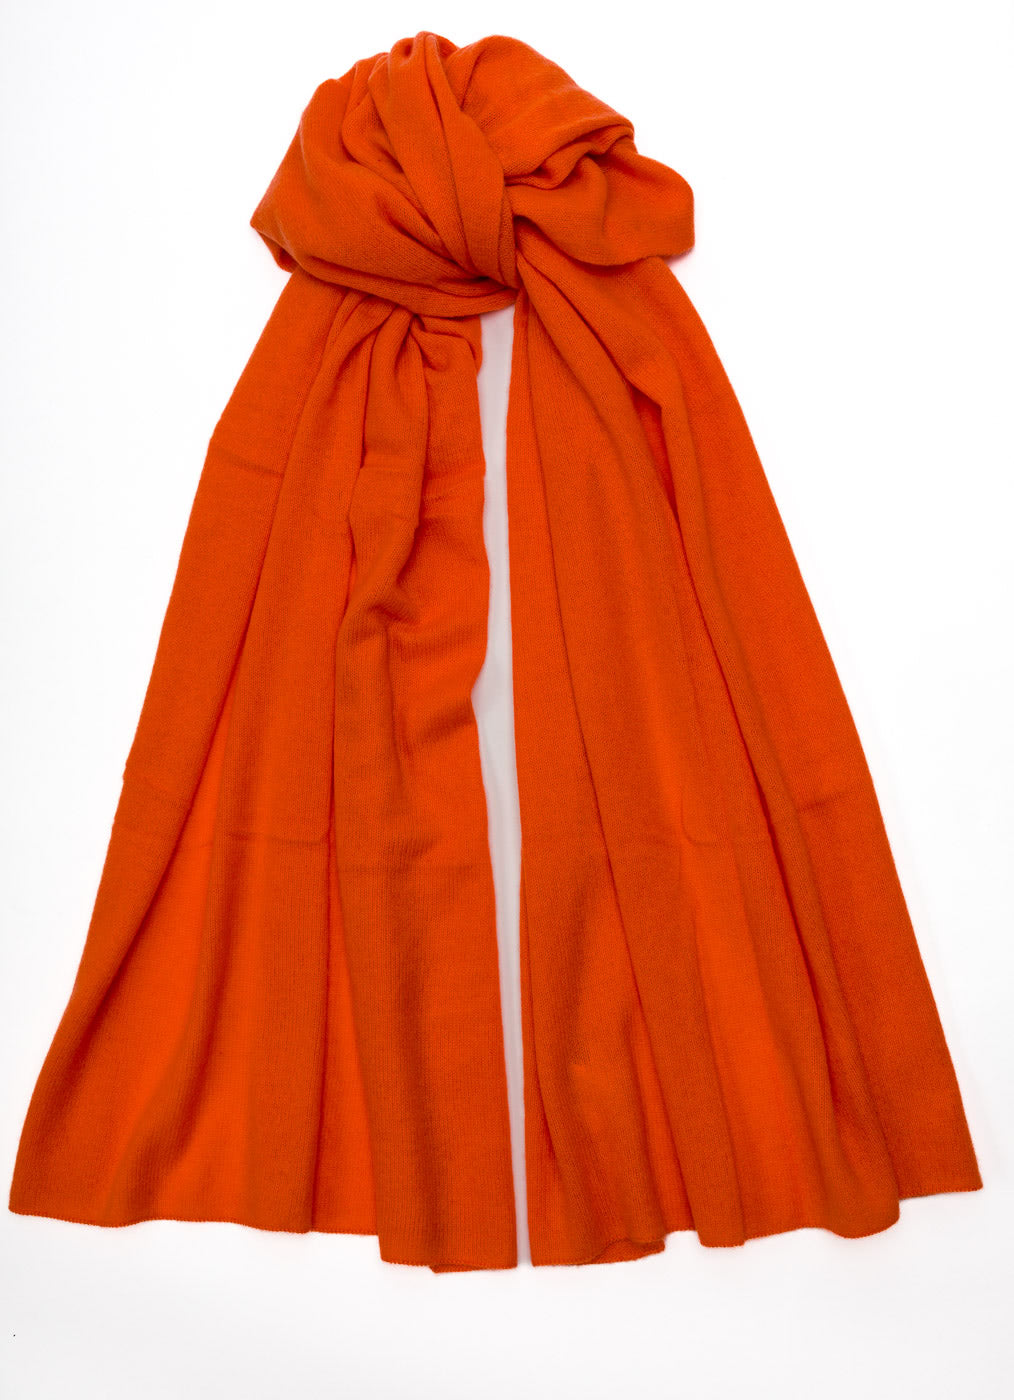 Large Scarf made of 100% pure Cashmere